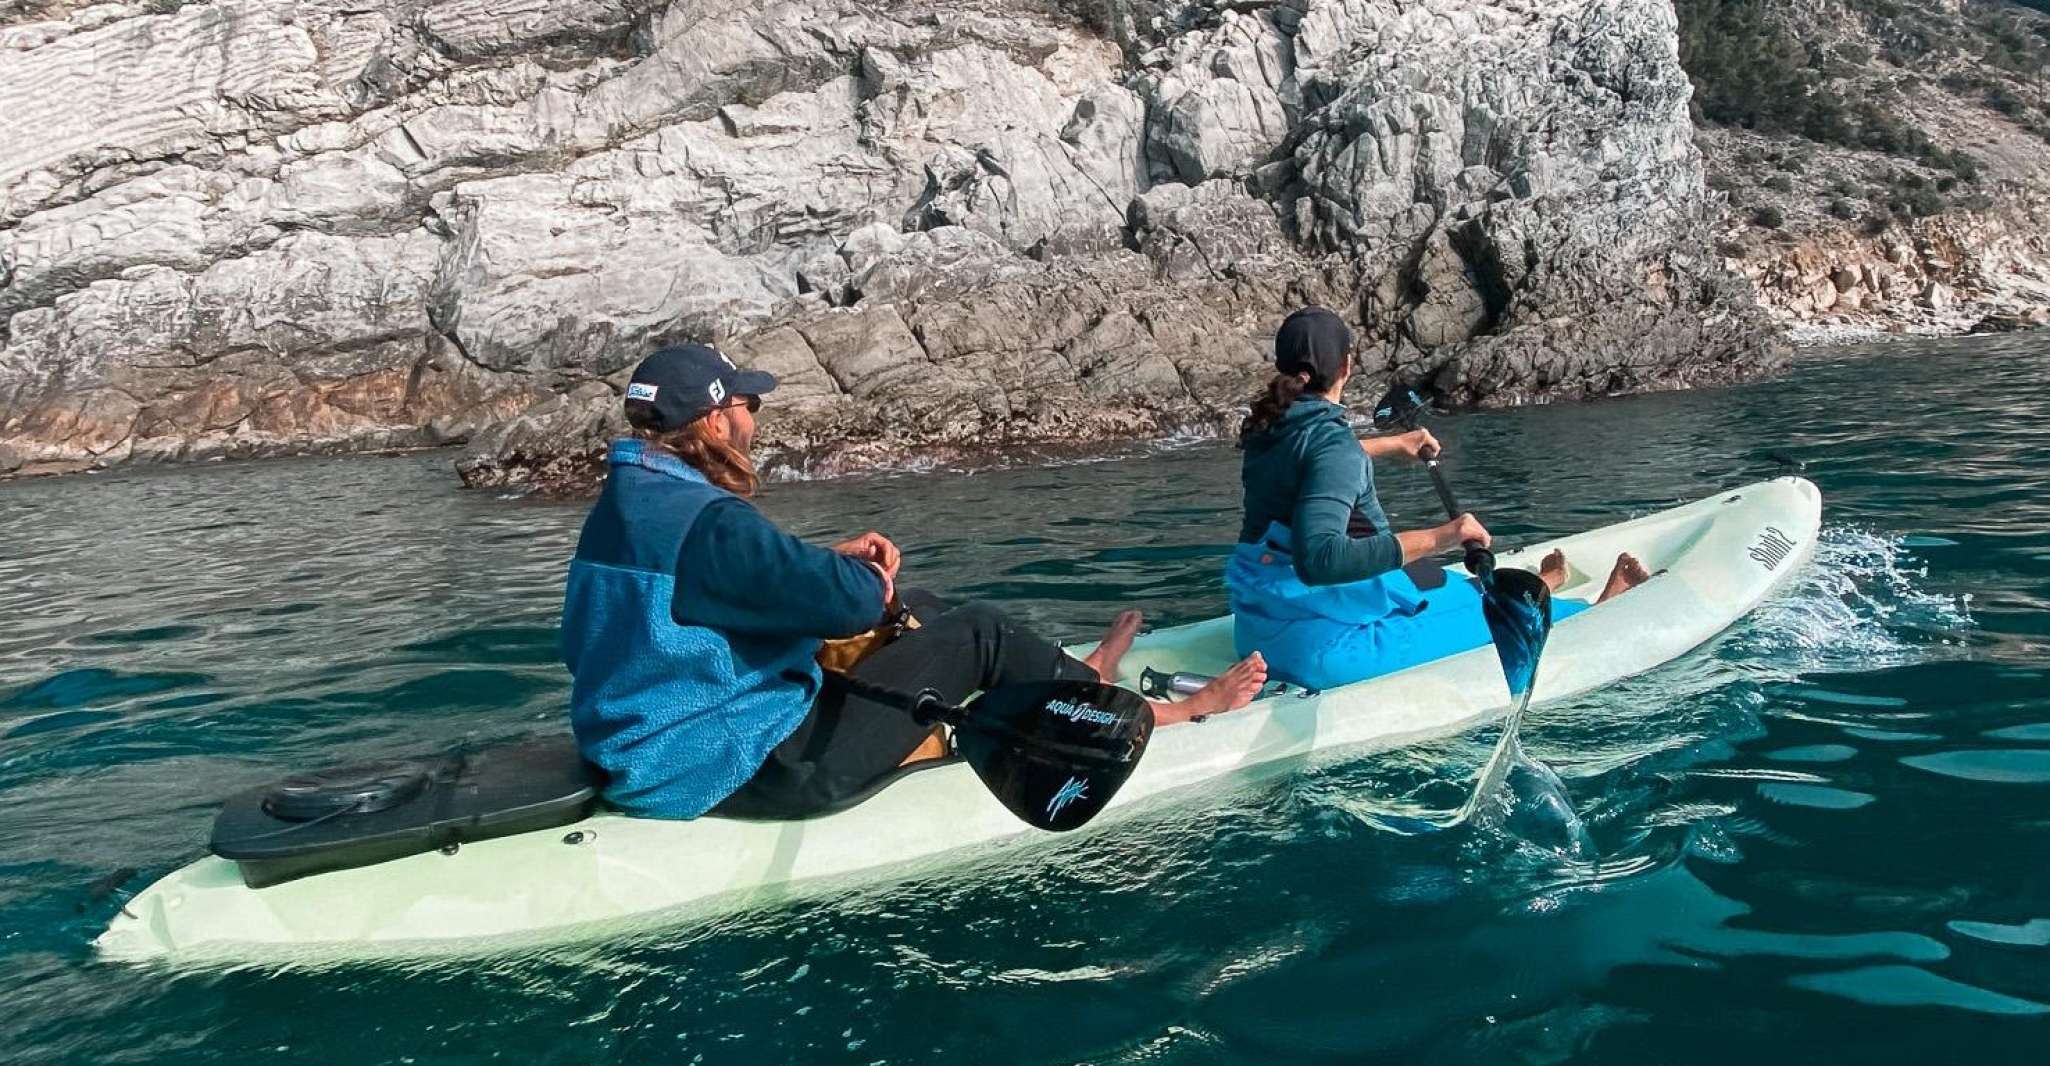 Kayak Tour in Levanto, Exploration and Nature - Housity